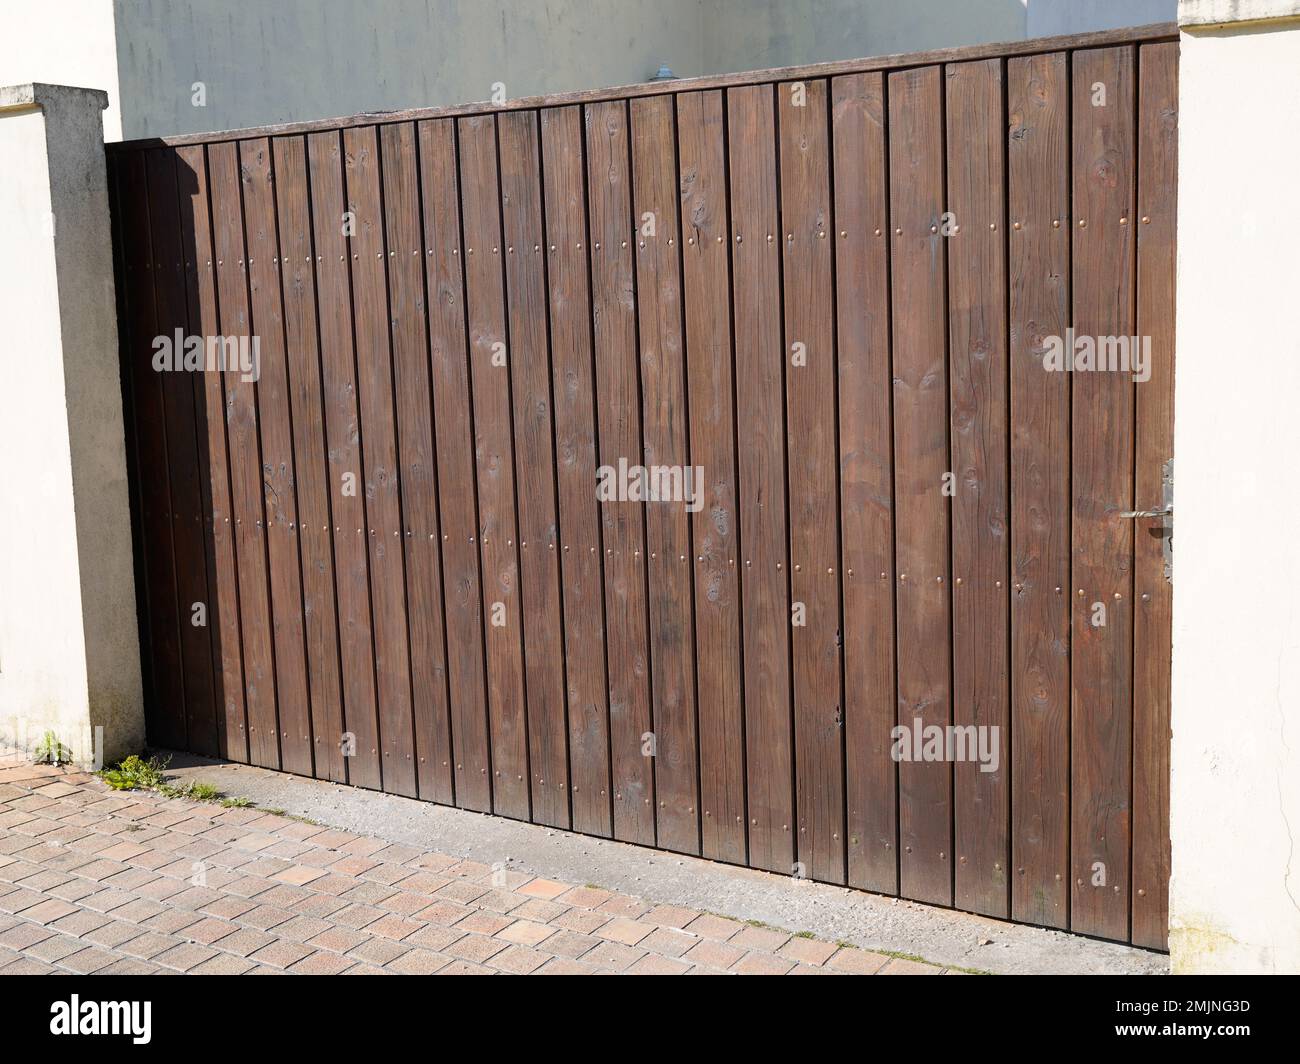 door wooden gate large design in street view outdoor home portal entrance Stock Photo